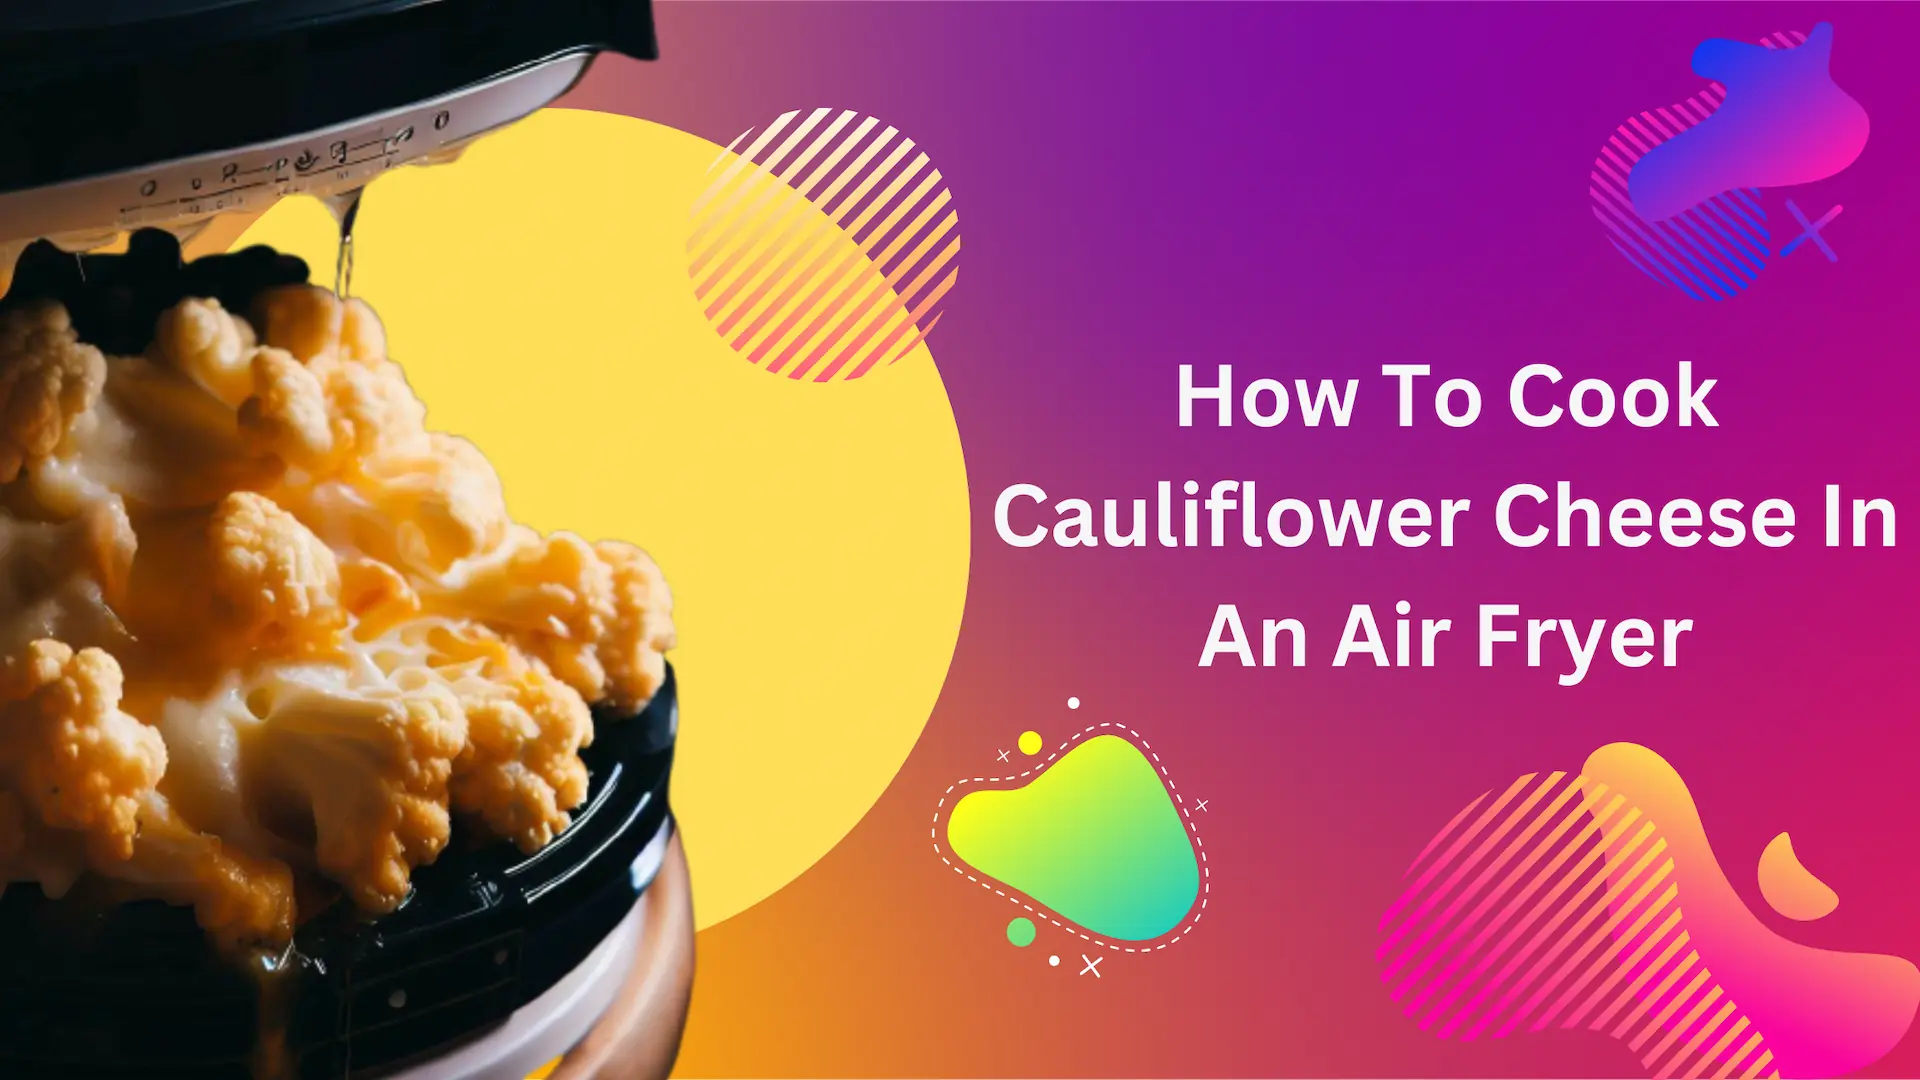 How To Cook Cauliflower Cheese In An Air Fryer